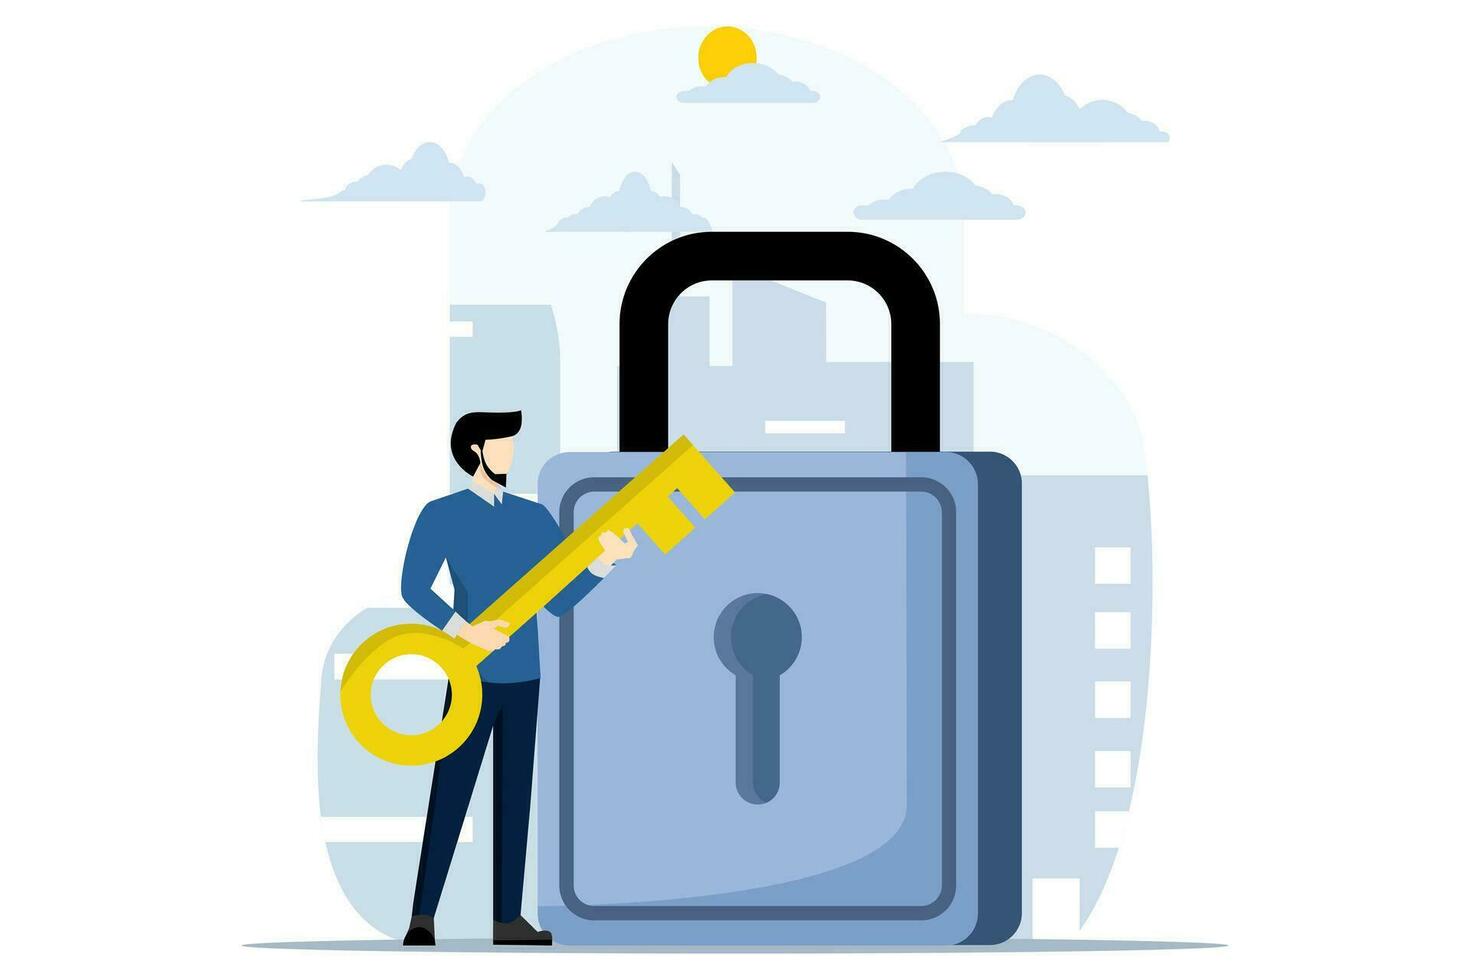 businessman holding key to open pad lock. professionals to provide solutions, Key to unlock, solve business problems, key to business success or unlock business accessibility concept. vector